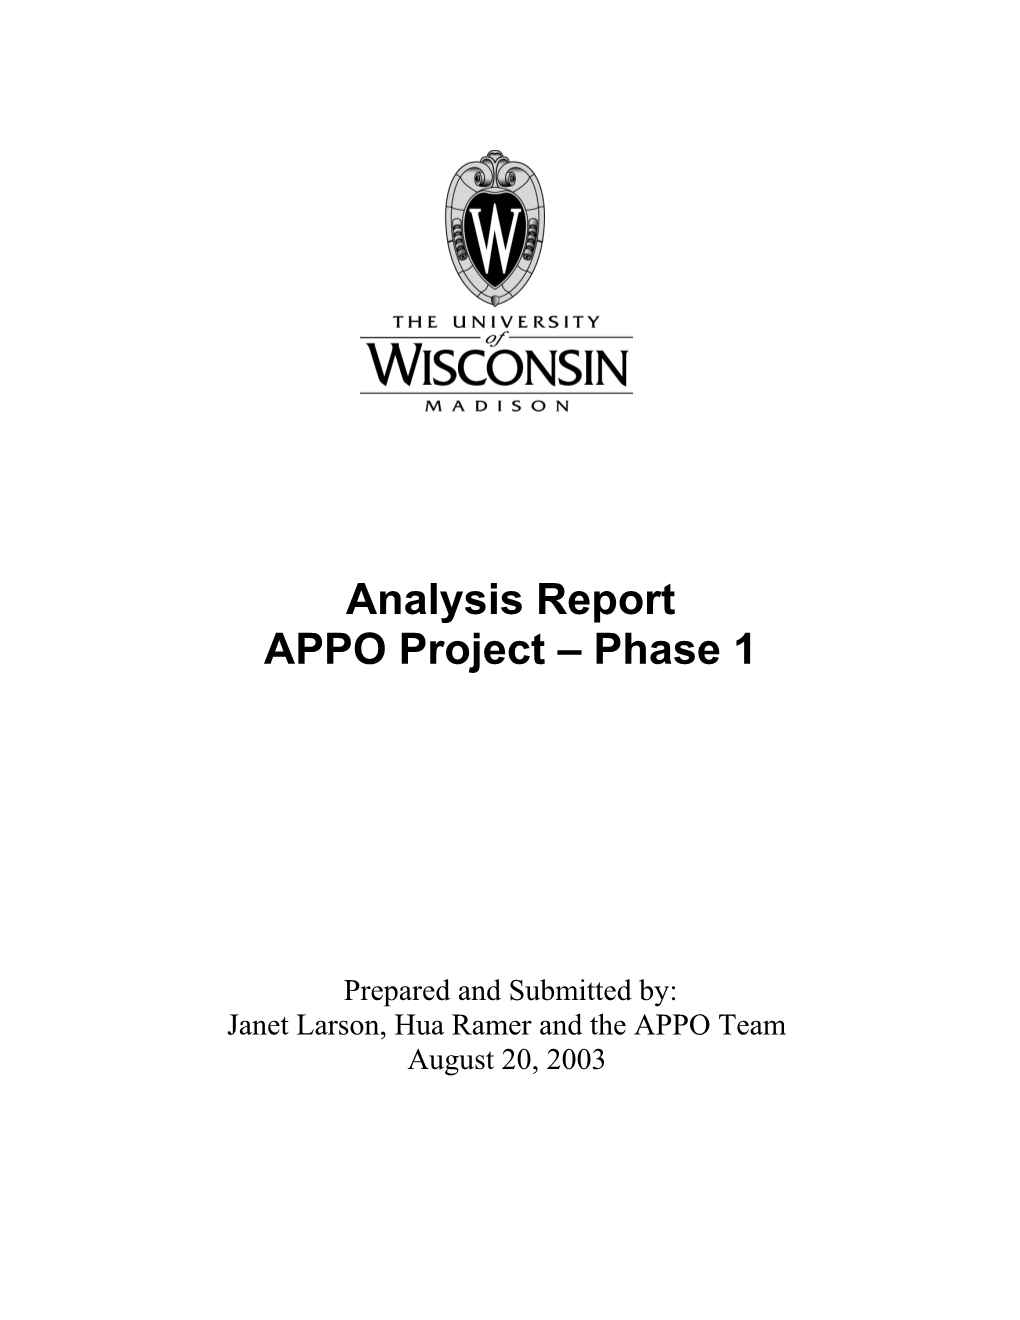 APPO Project Phase 1